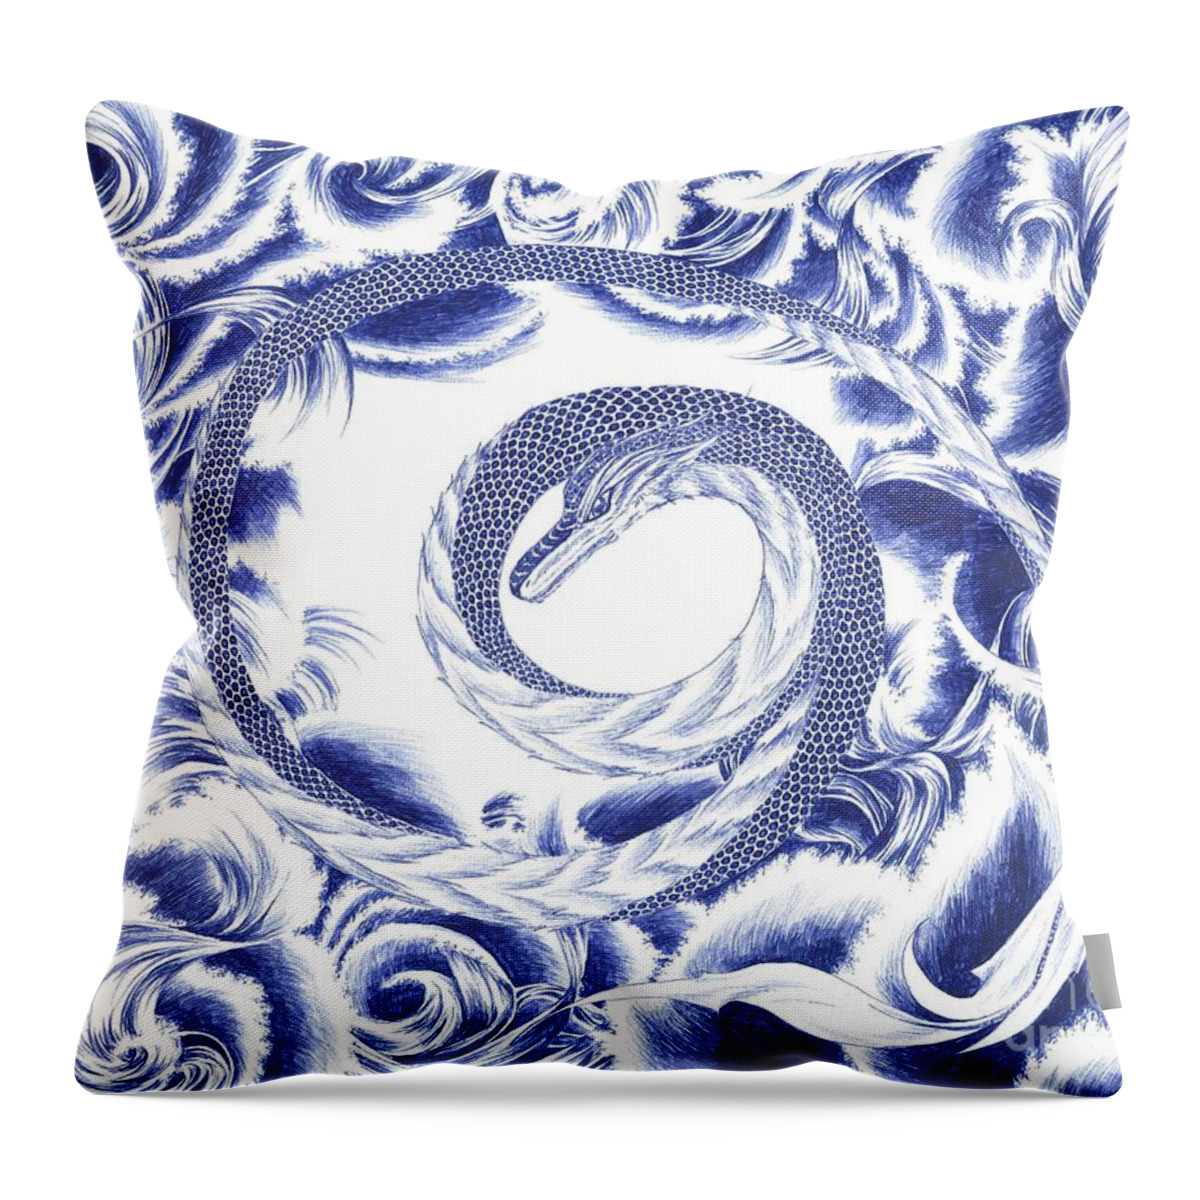 Dragon Throw Pillow featuring the drawing Eternal by Alice Chen